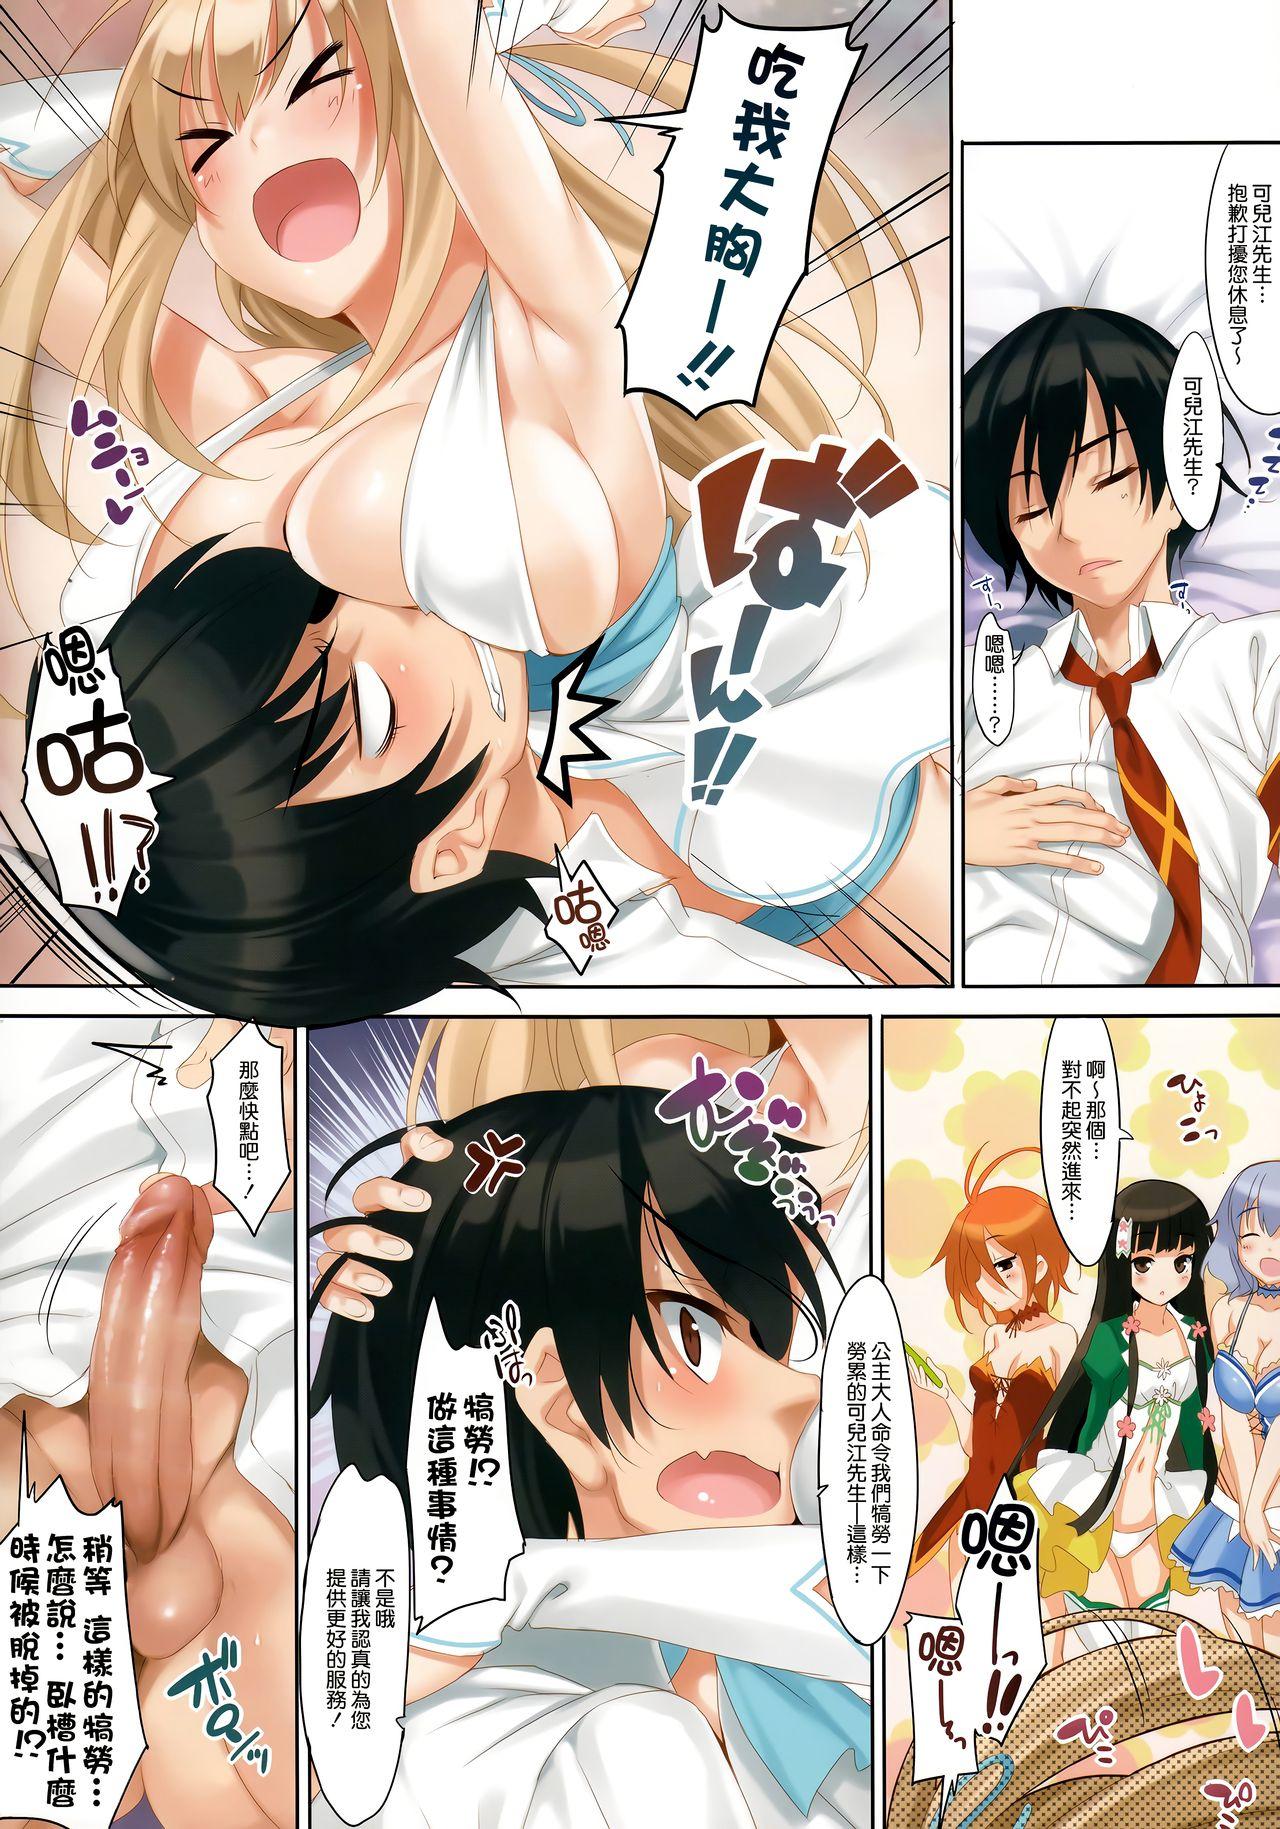 Speculum CL-orz 42 - Amagi brilliant park Pinay - Page 5